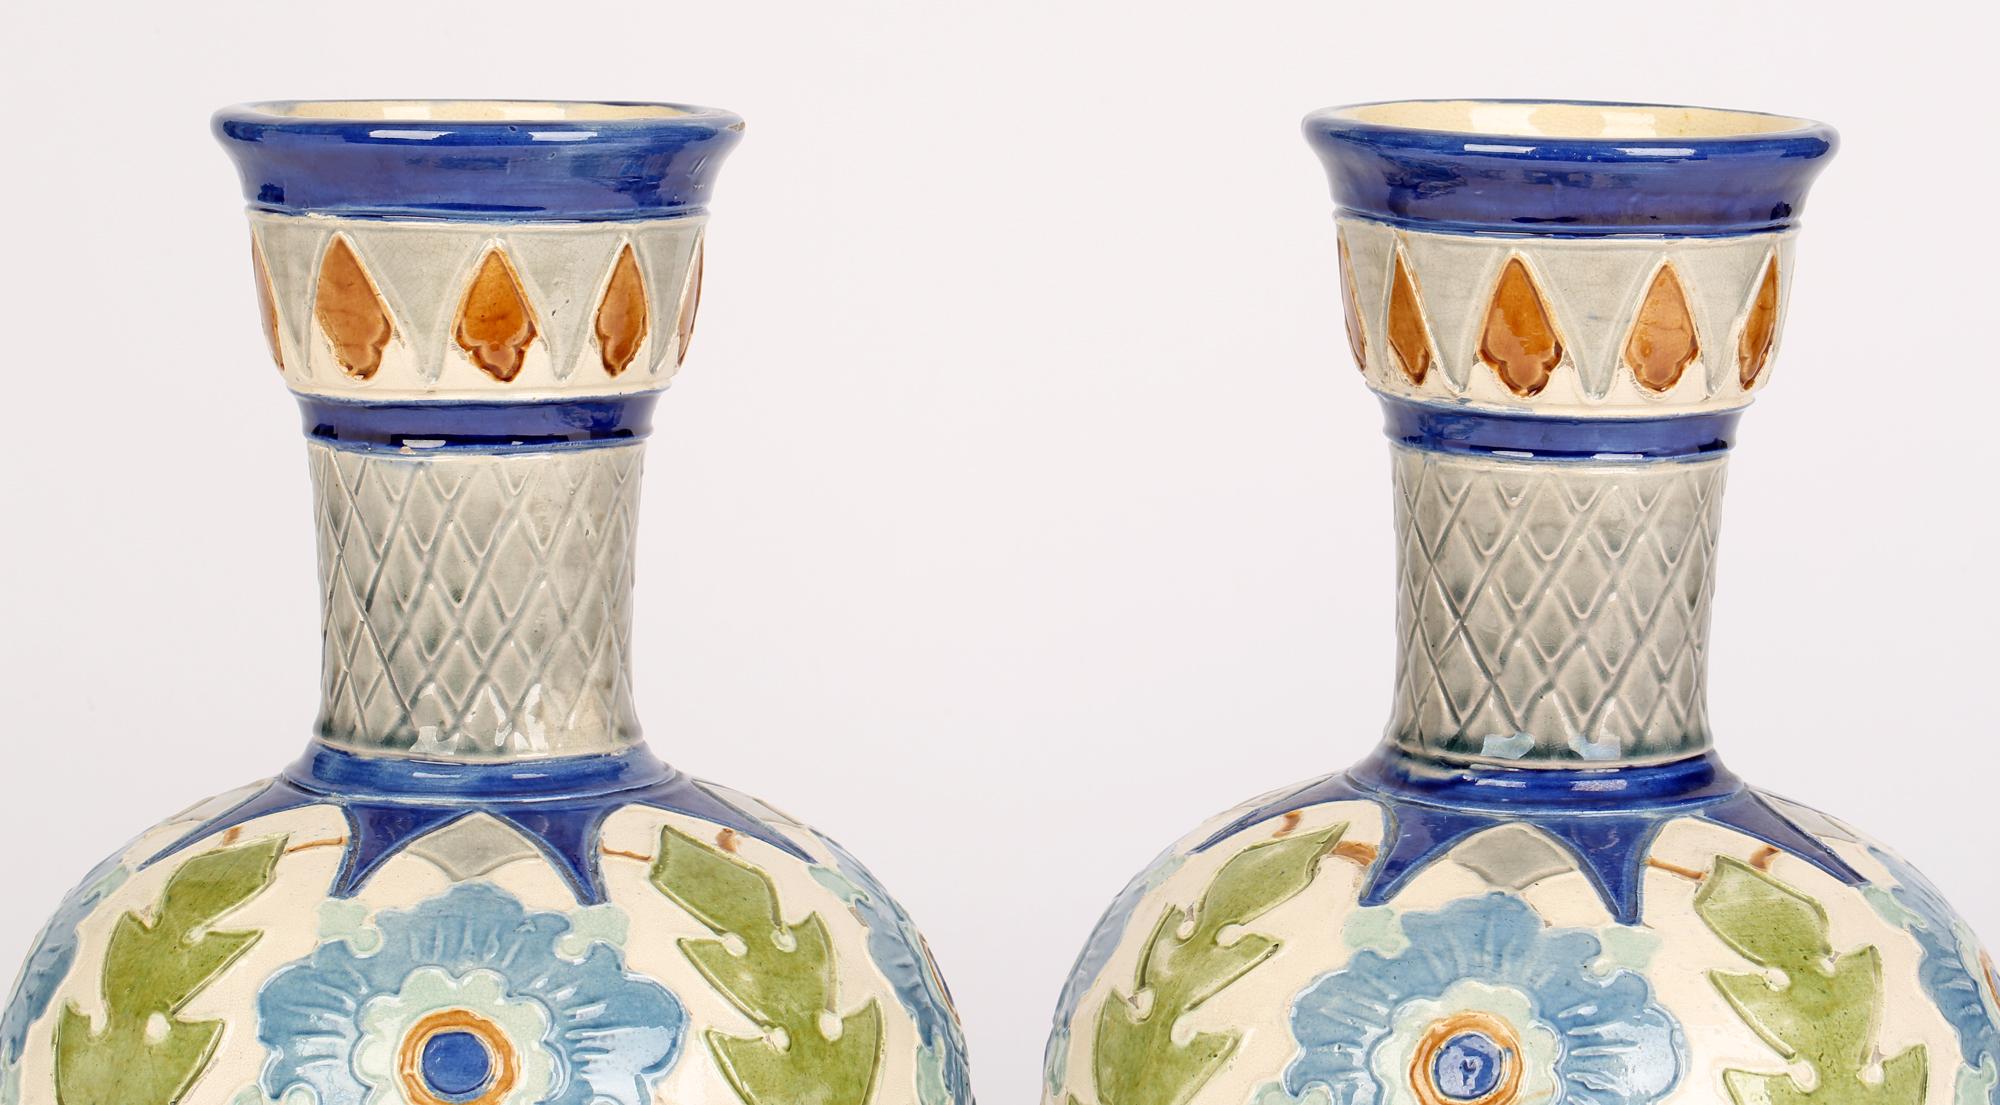 A pair Burmantofts Faience Partie-Color bottle vases with floral designs dating from around 1890. The vases have round bodies raised on a narrow round foot rim with flaring cylindrical necks with cup shaped tops and both are modelled in low relief